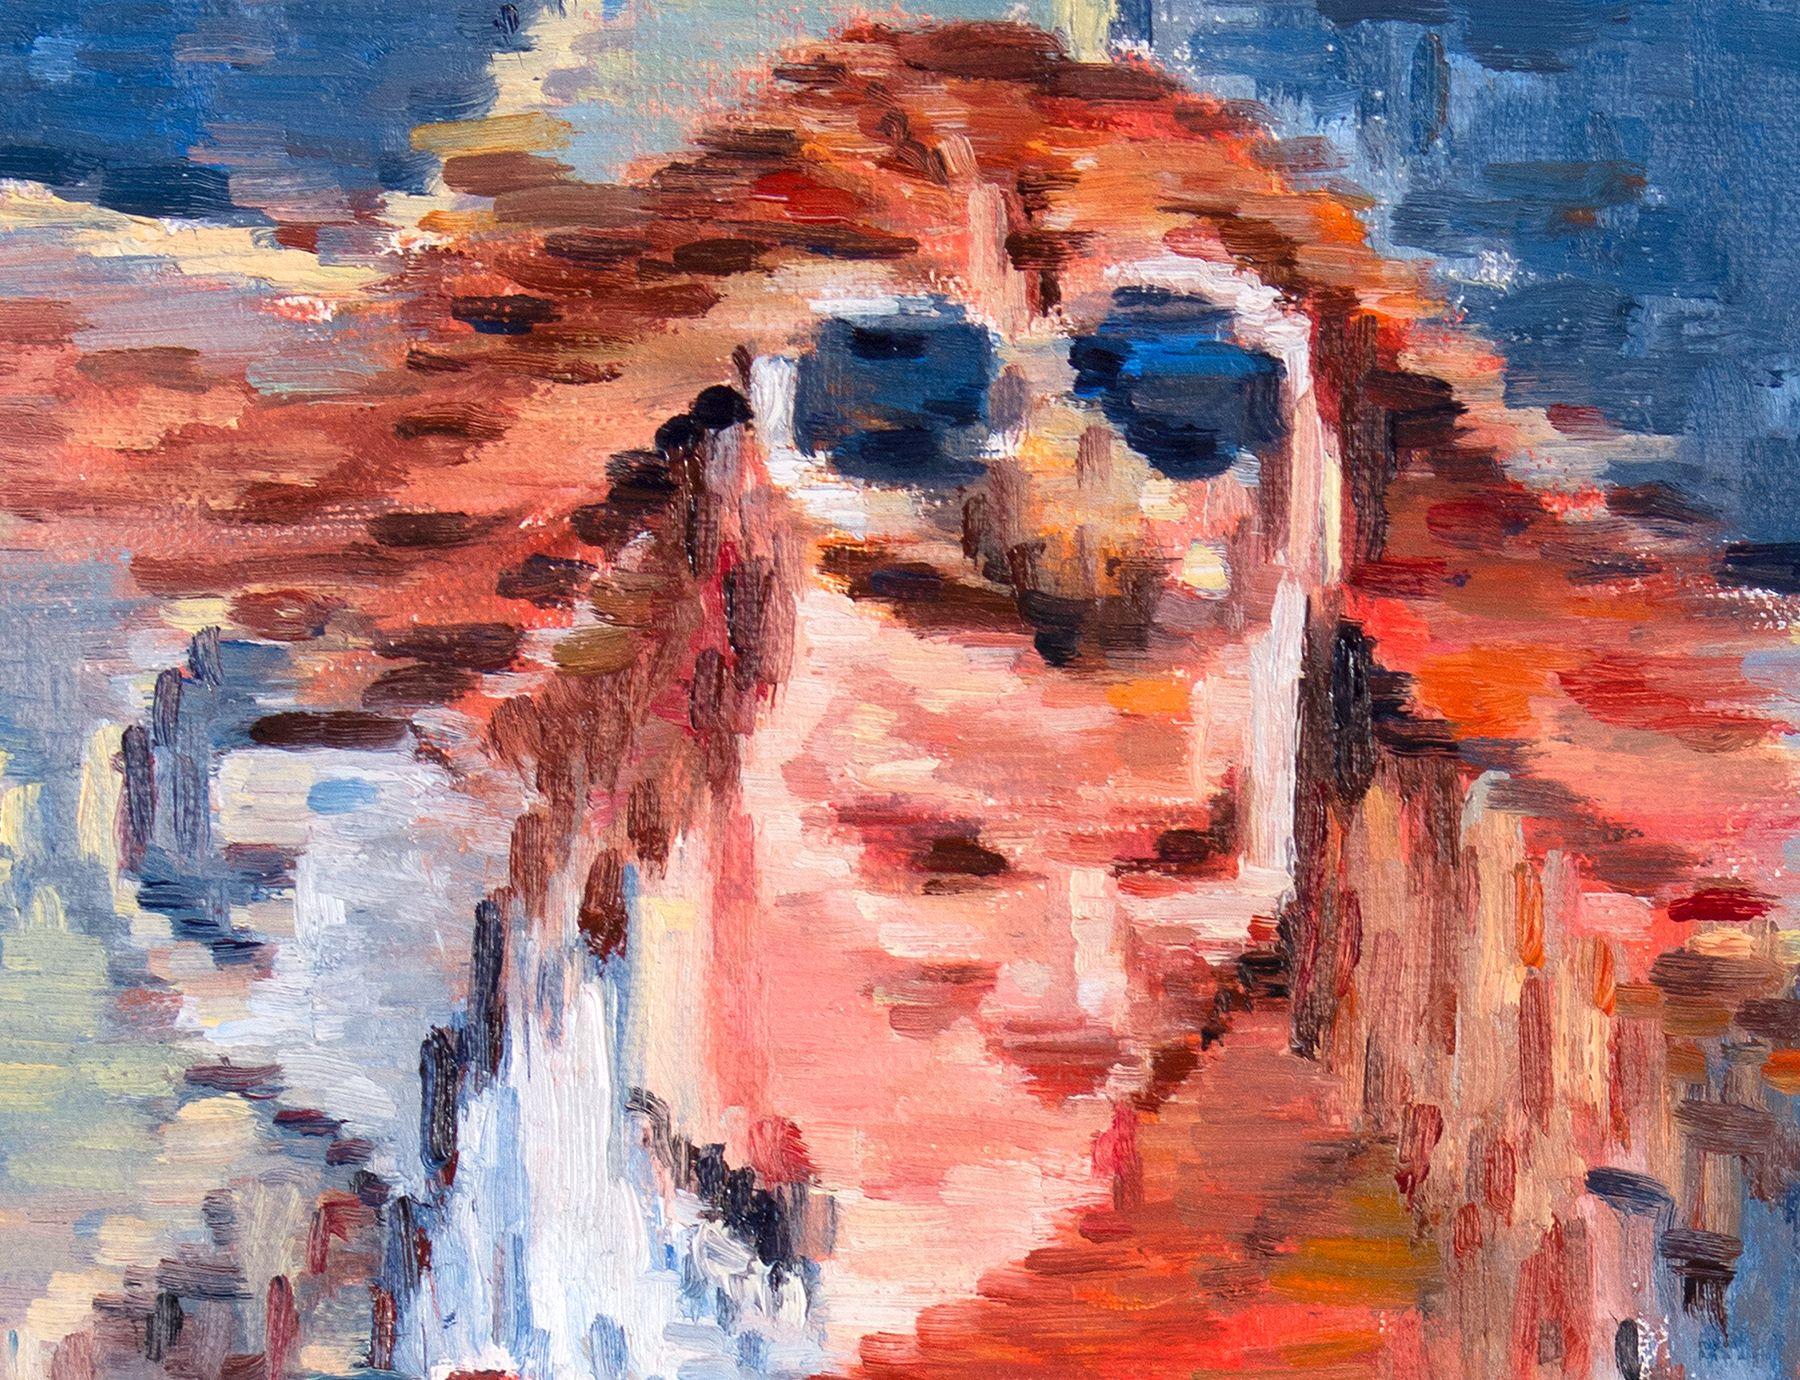 This expressive figure painting was inspired by my view from a restaurant balcony on Hollywood Boulevard at the pedestrians walking below. My signature Pixel Impressionism brush strokes render this aerial portrait of an excited tourist. :: Painting